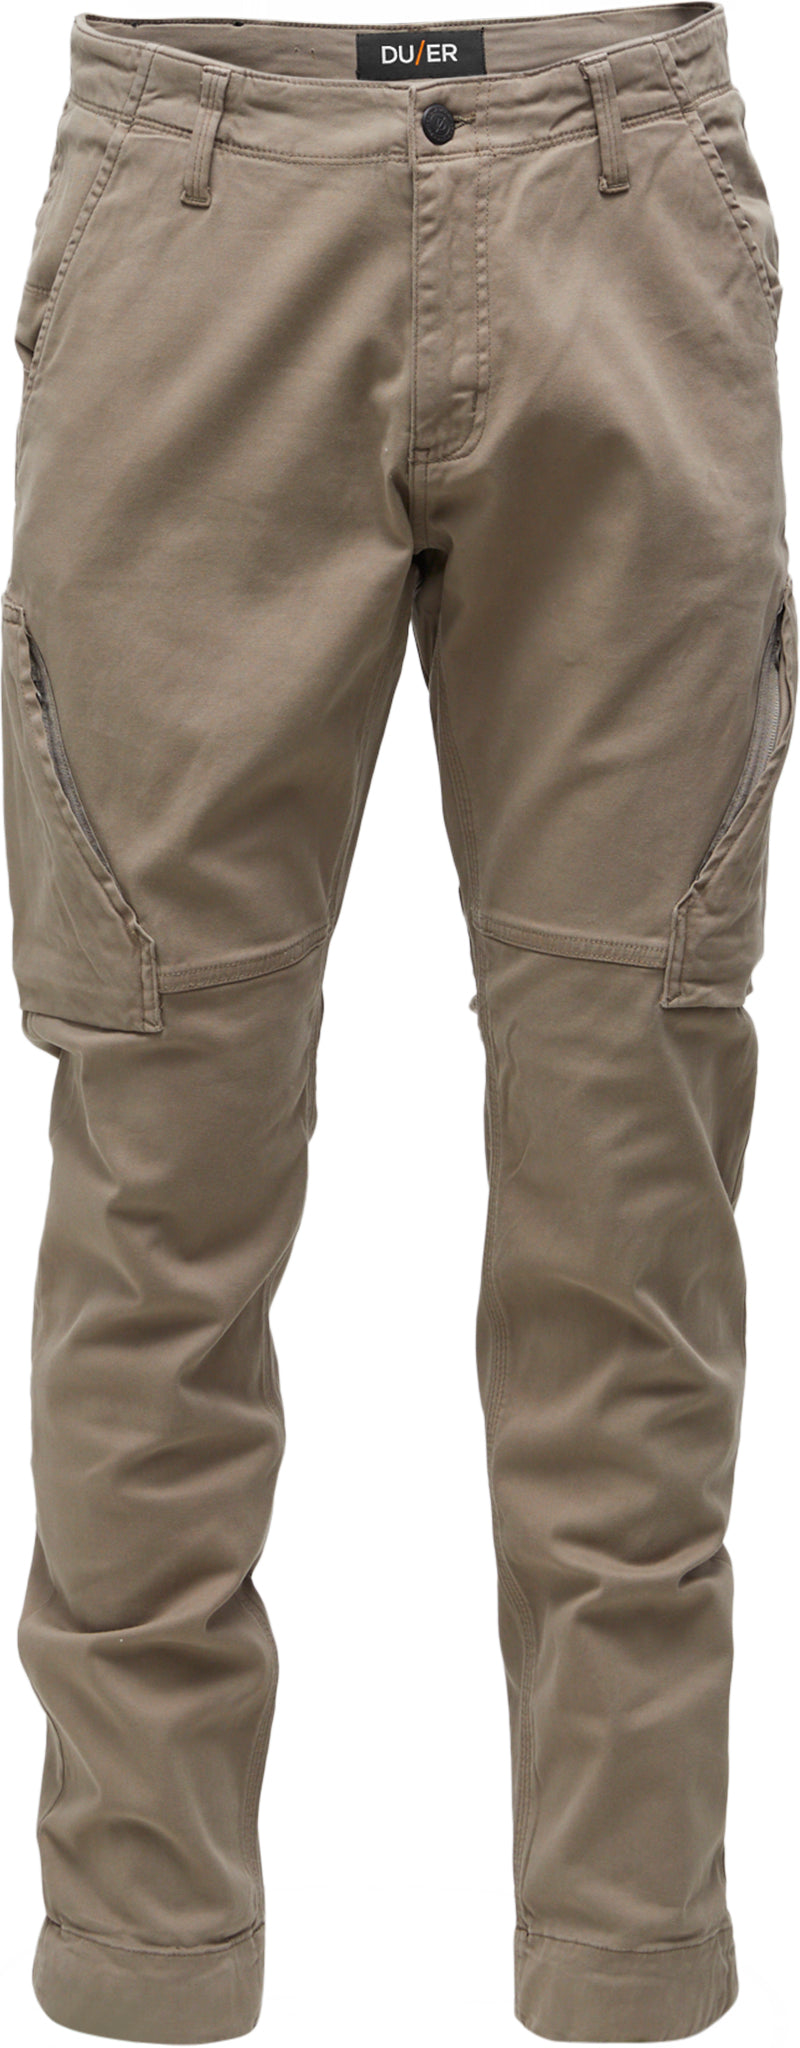 Duer Men's All-Weather Adventure Pant